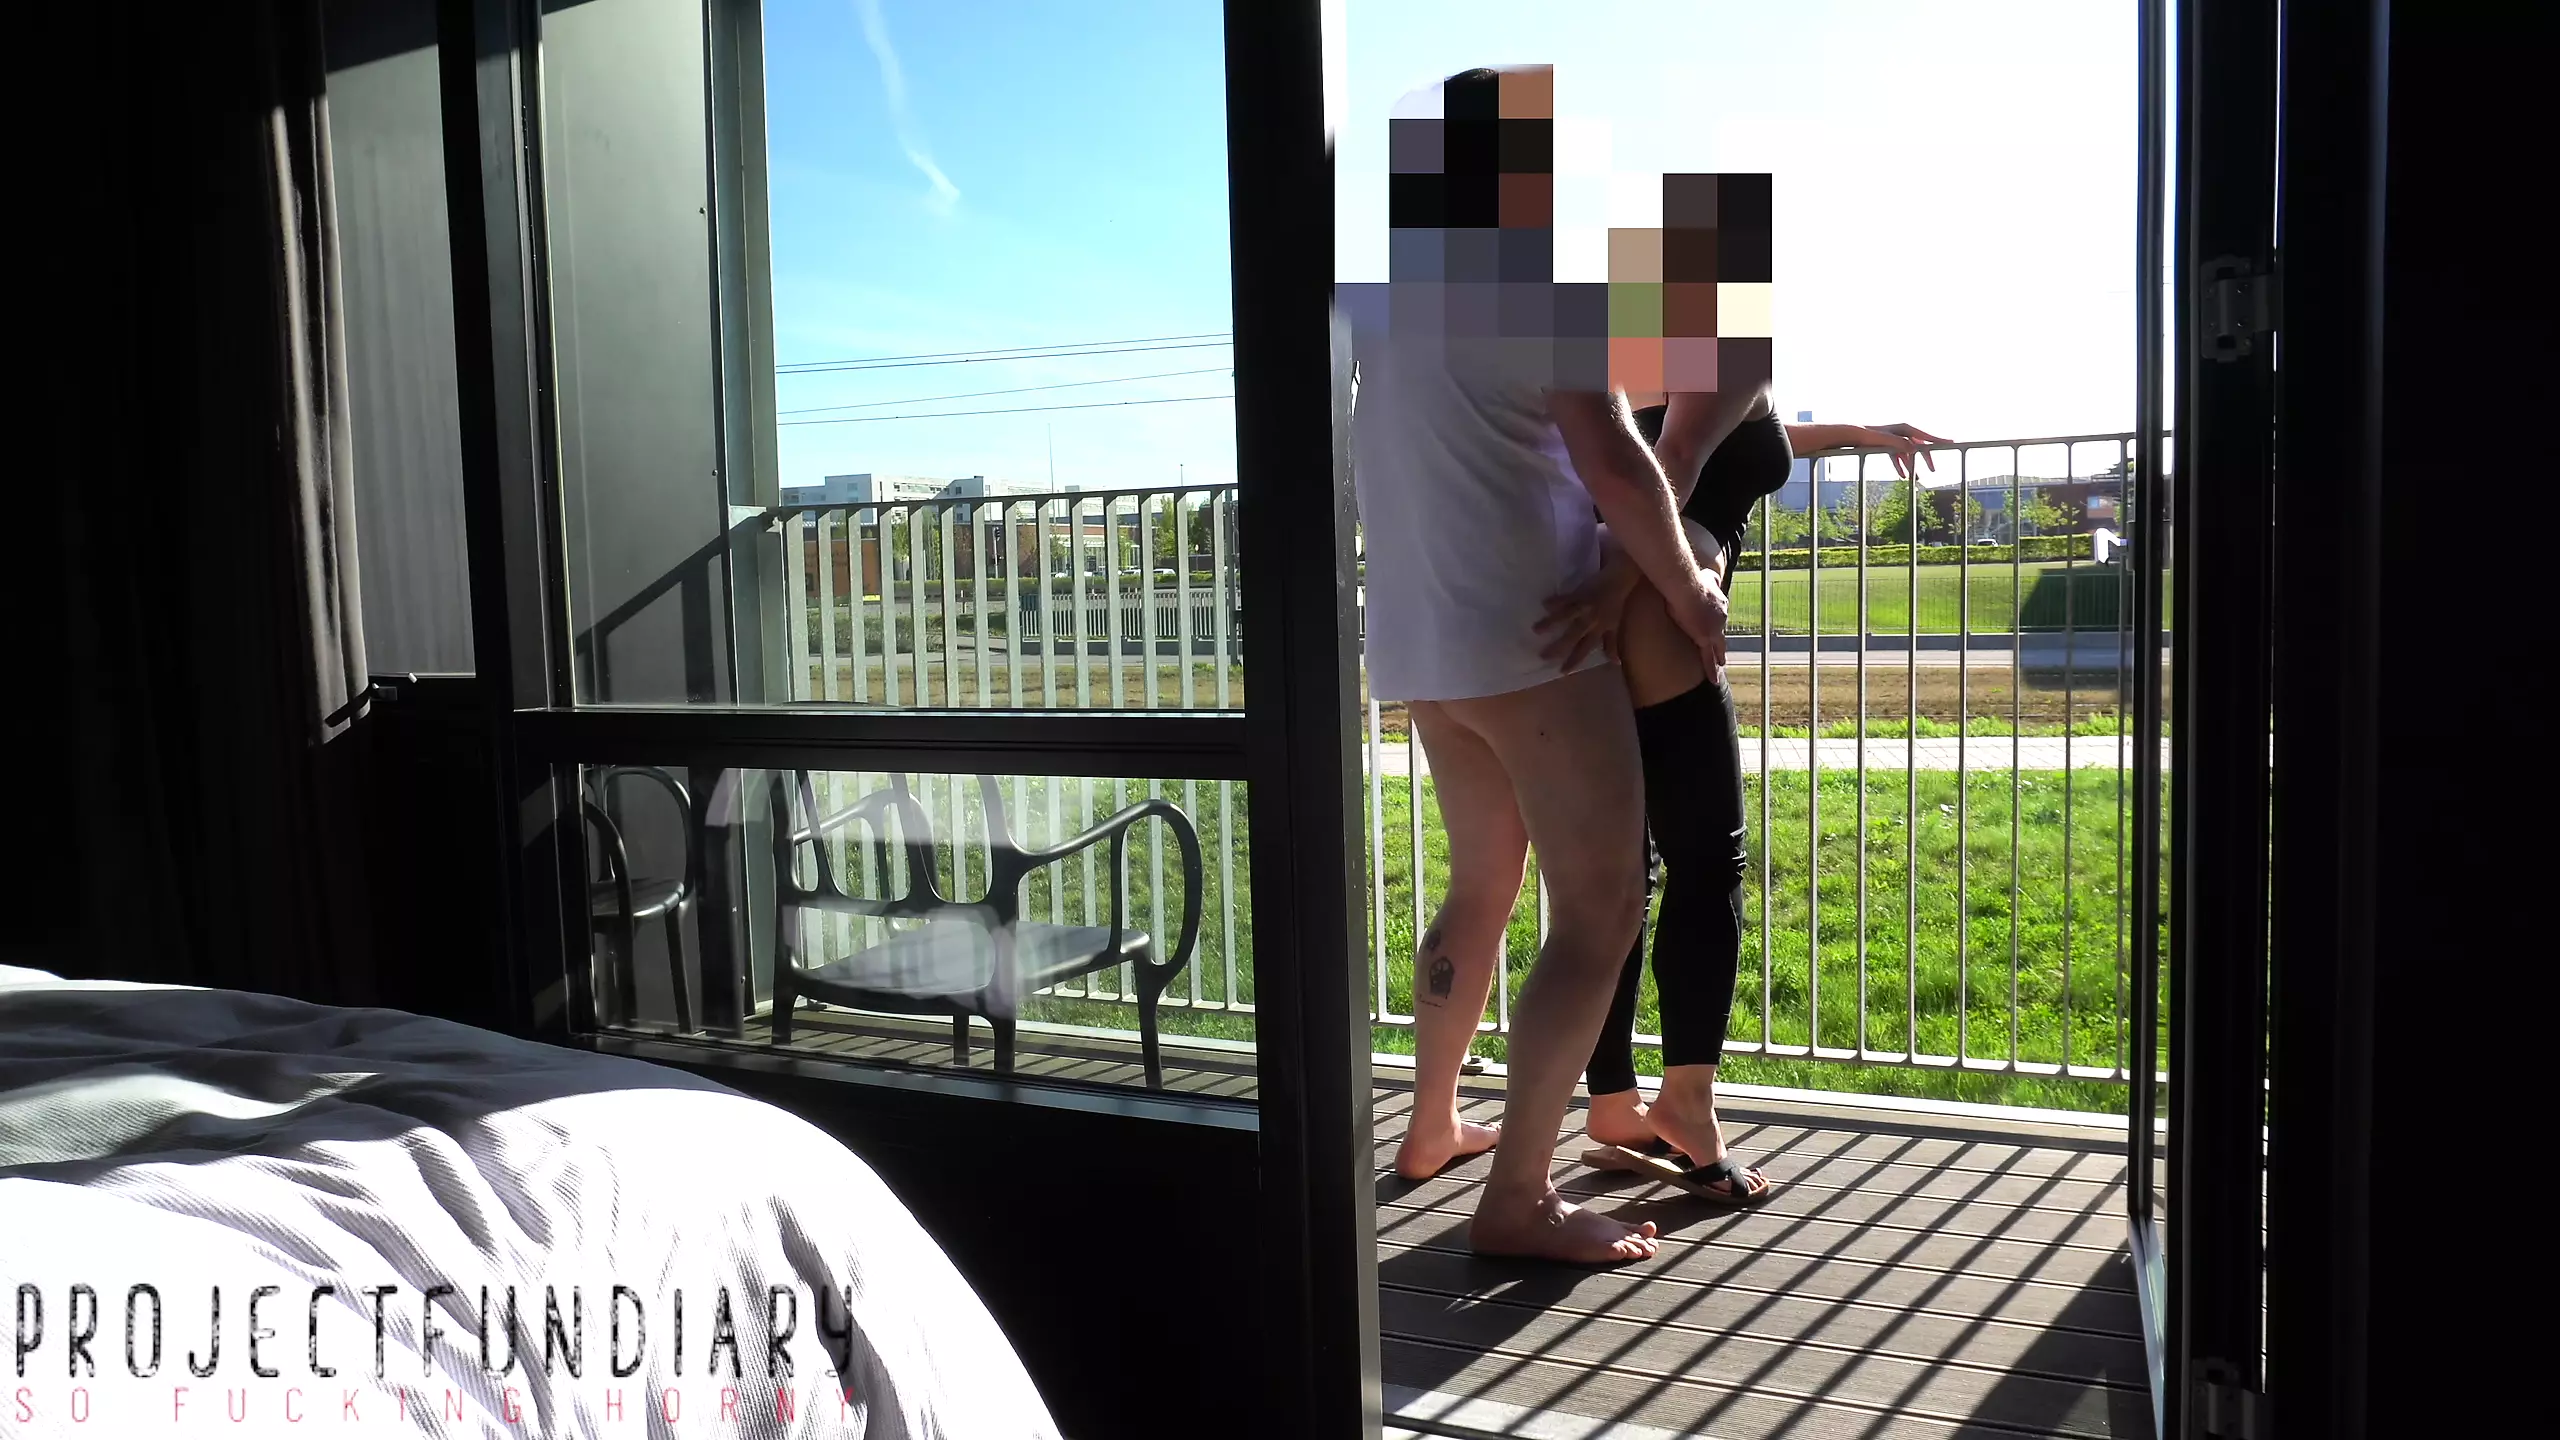 risky public balcony sex with people watching pic